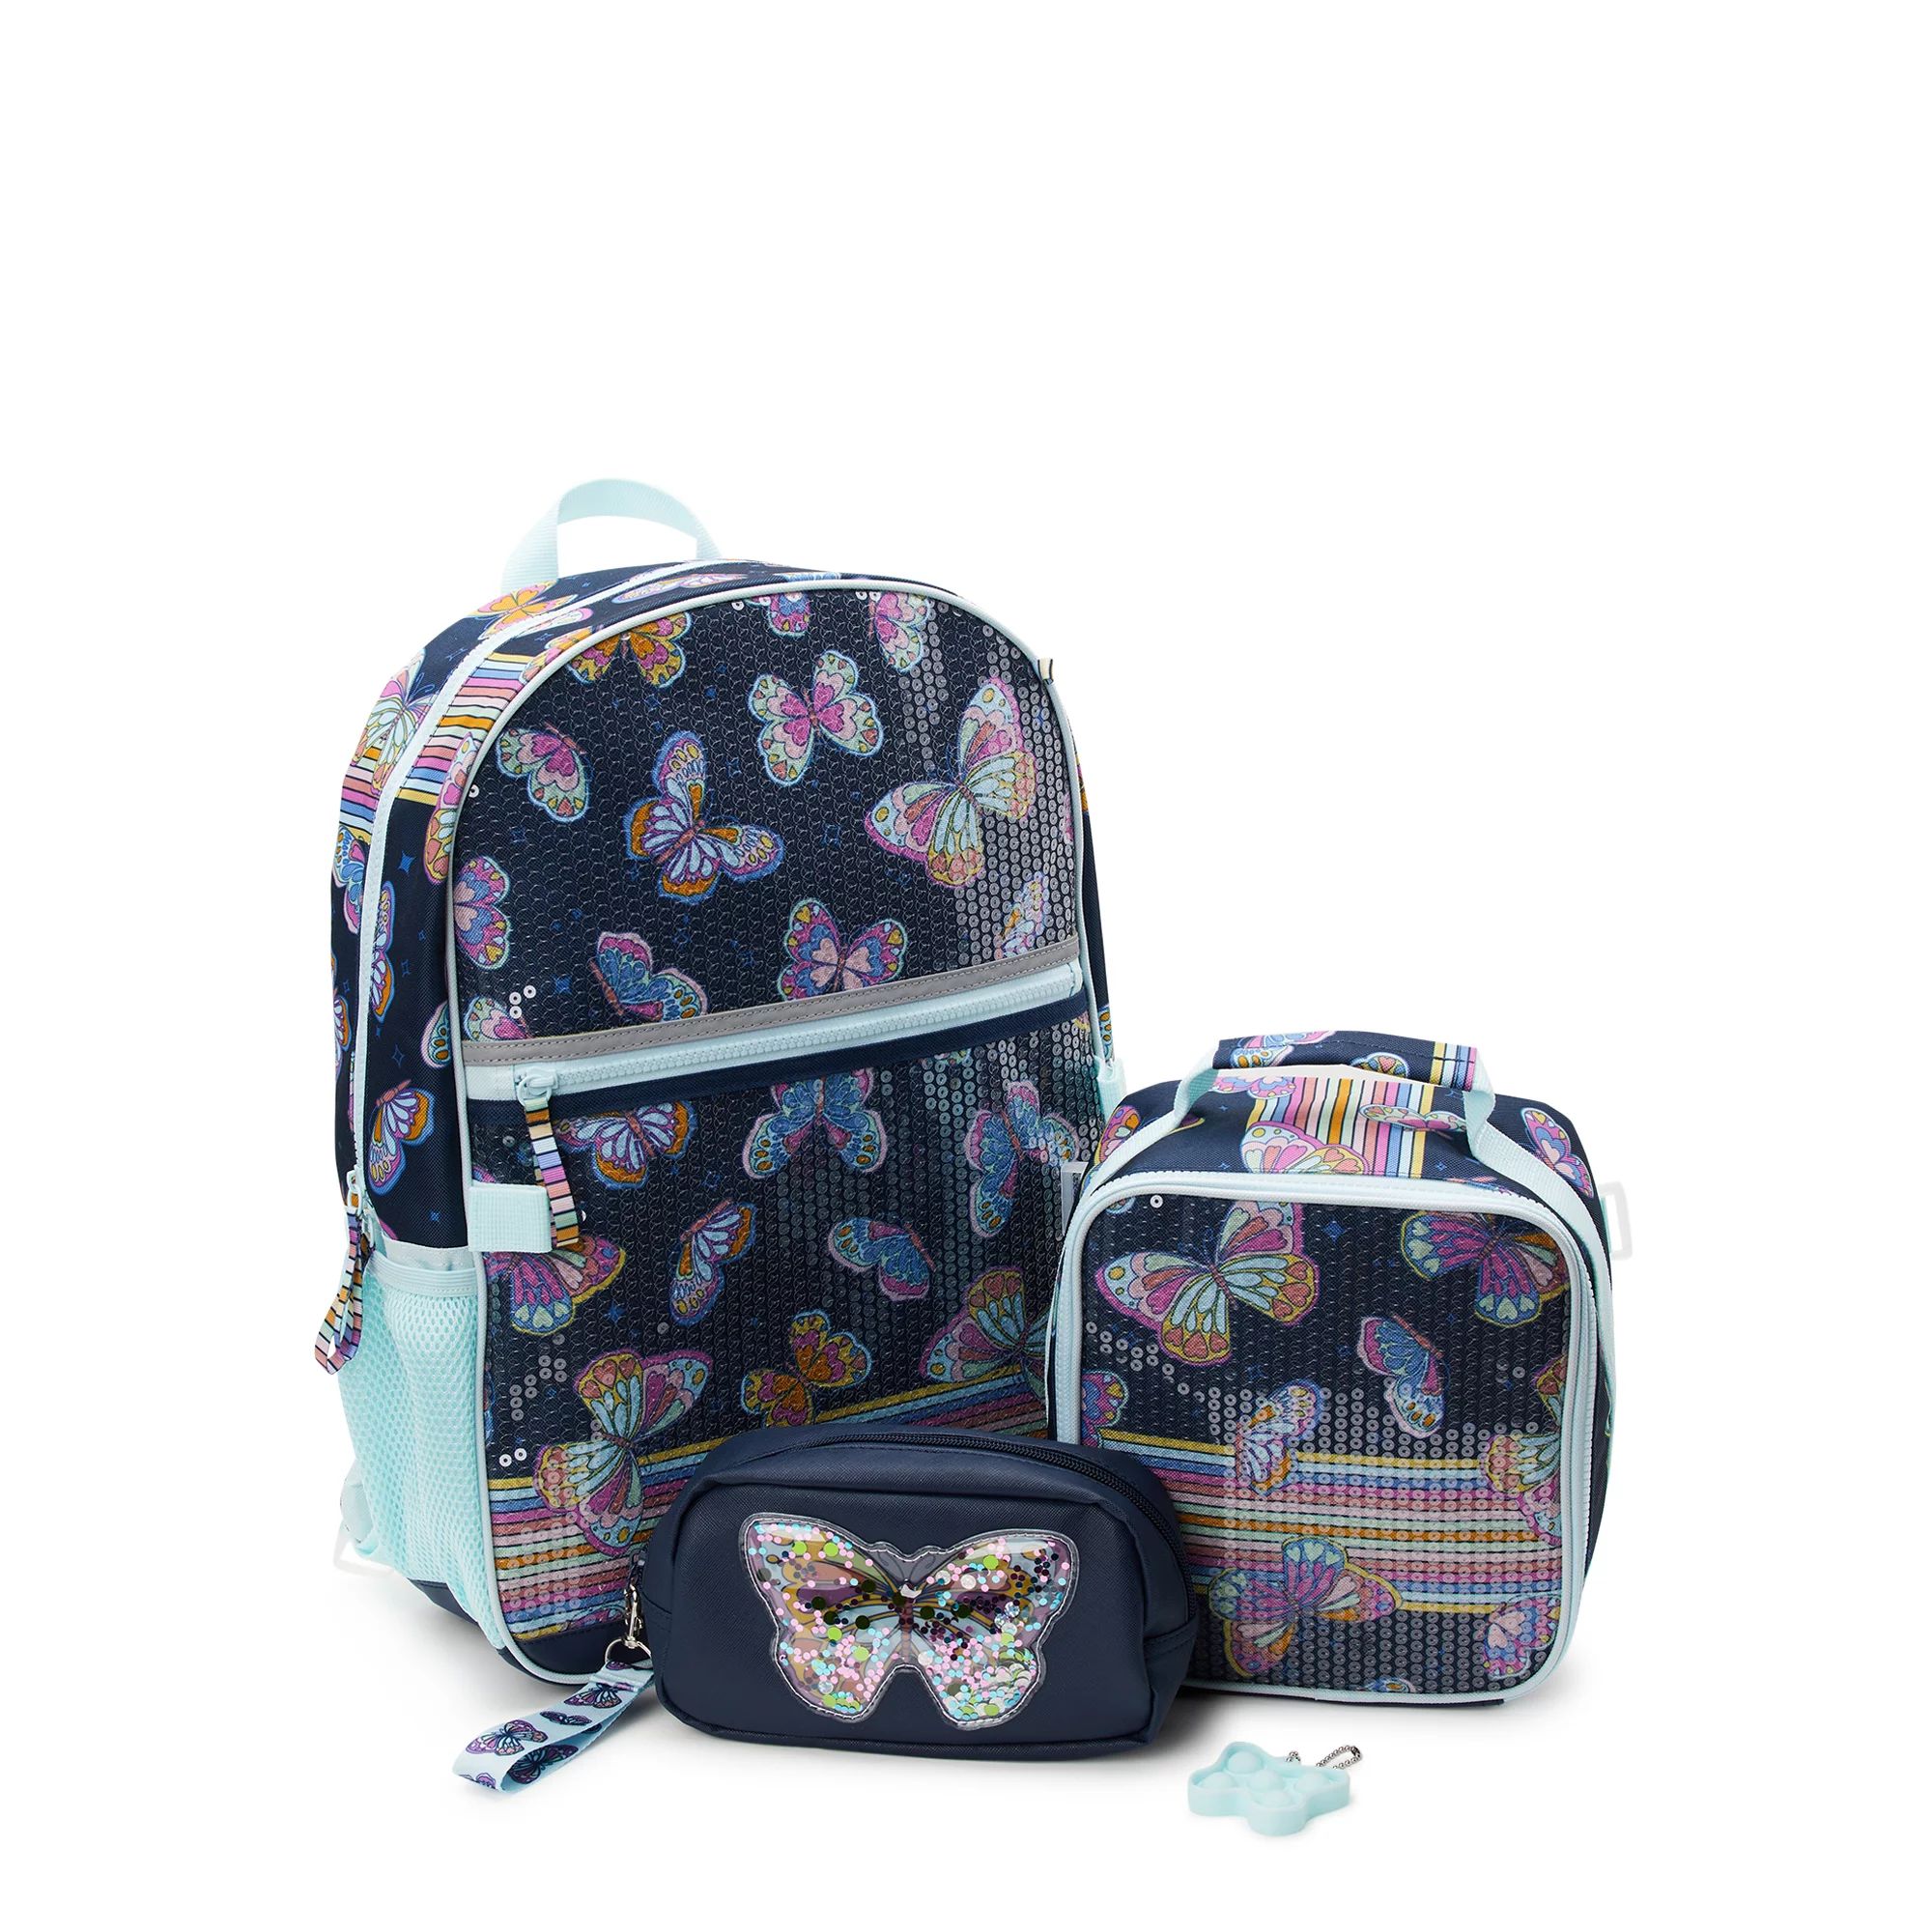 Wonder Nation Kids 17" Laptop Backpack and Lunch Tote Set, 4-Piece, Butterfly Print Blue Cove | Walmart (US)